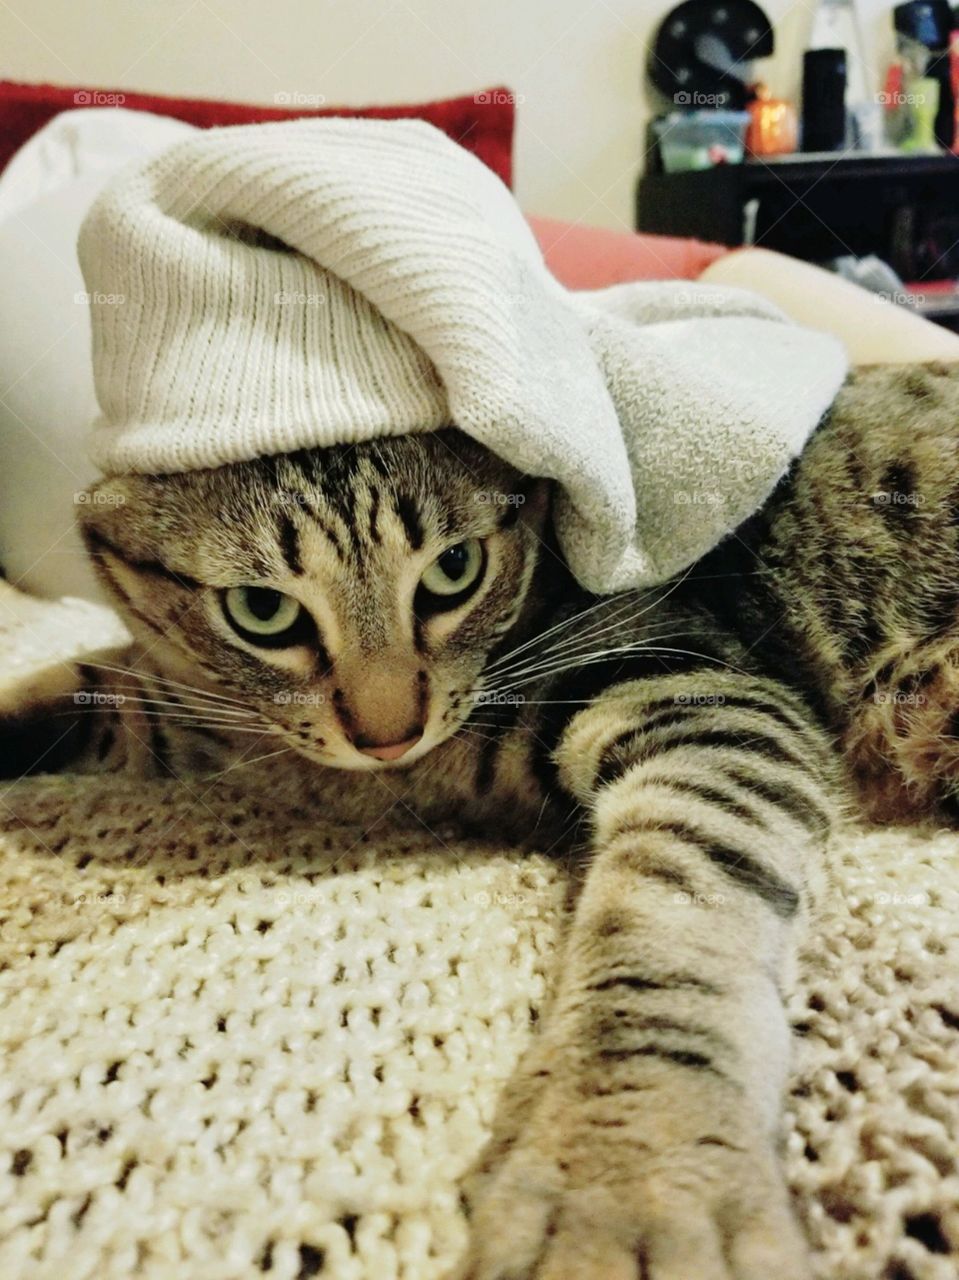 My kitty with a sock on his head